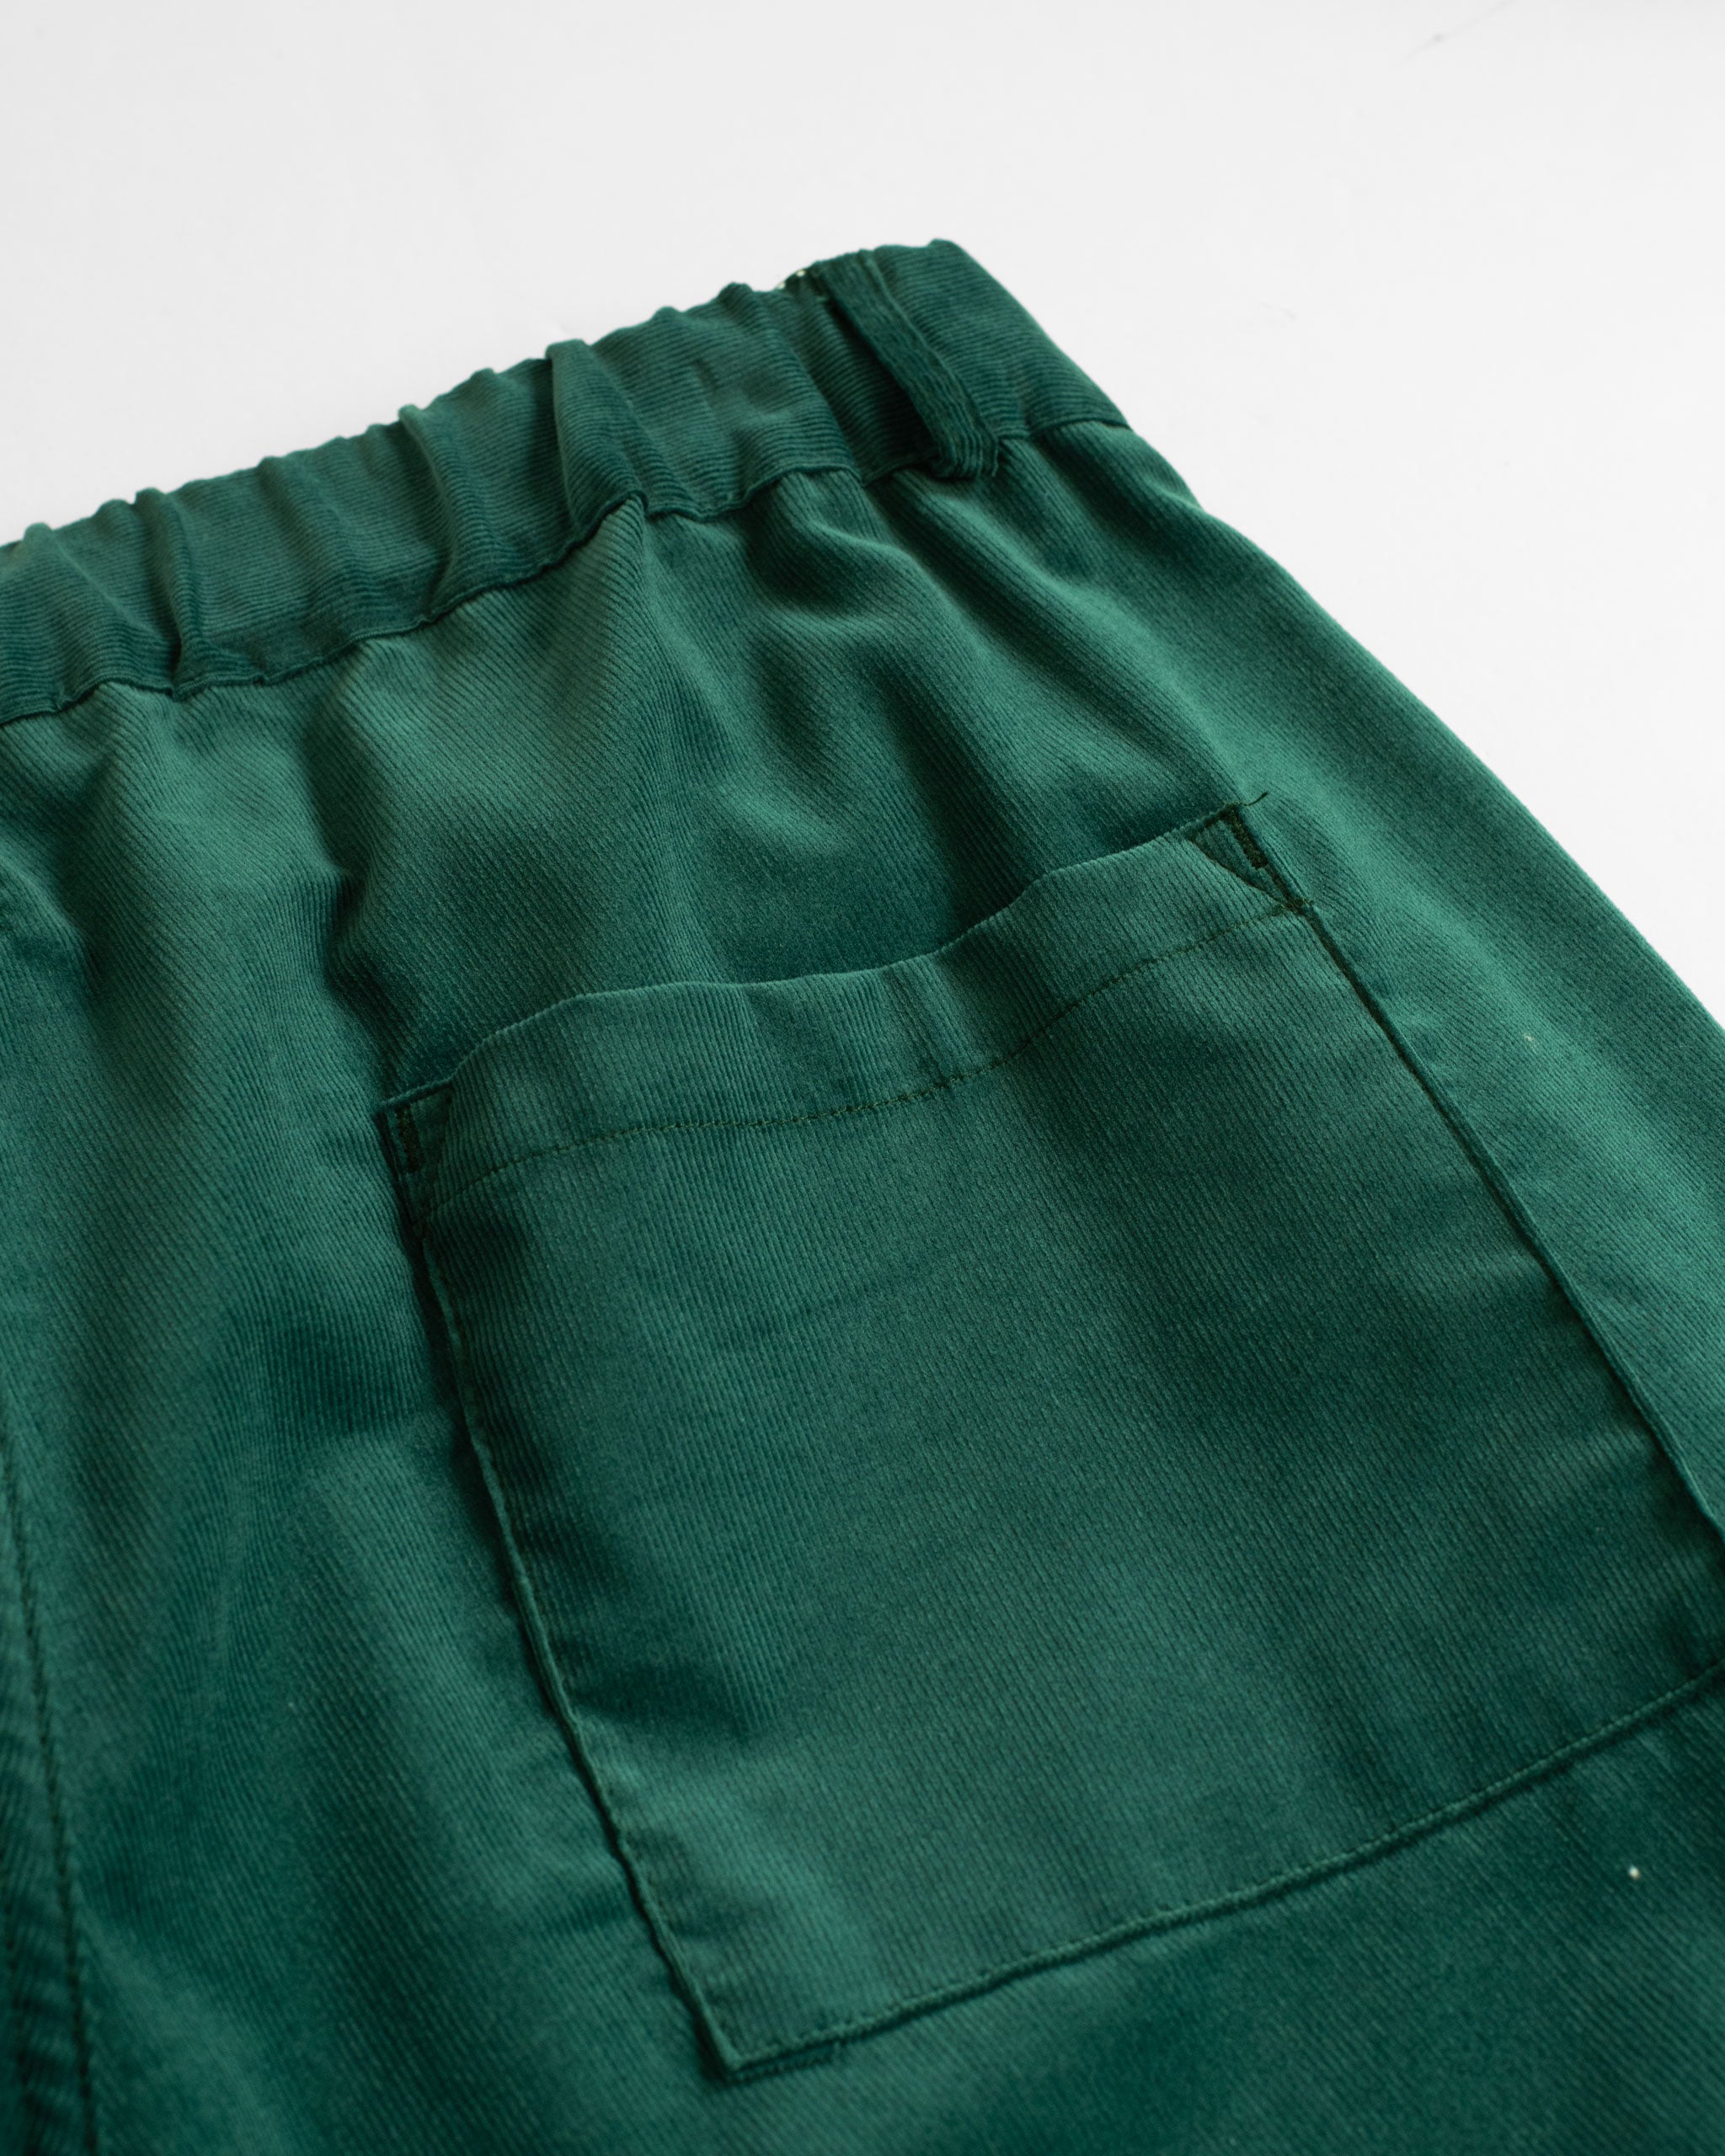 Forest Green Solid Corduroy Leisure Shorts back pocket close up